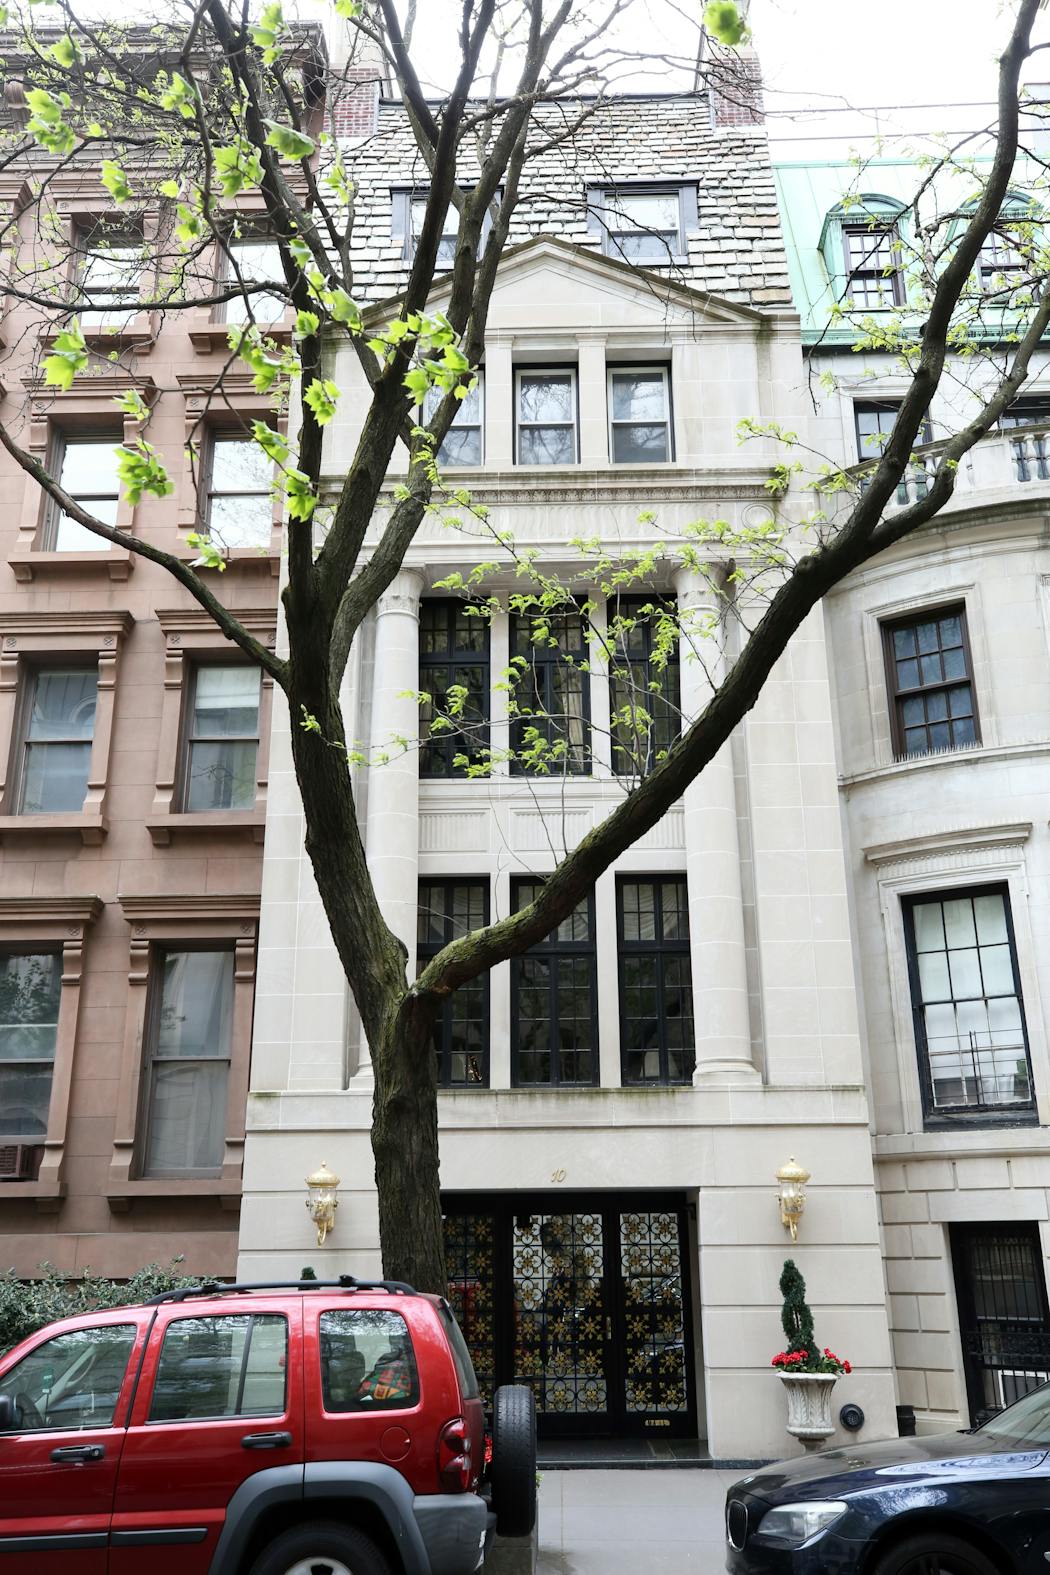 Ivana Trump’s townhouse on the Upper East Side of Manhattan.